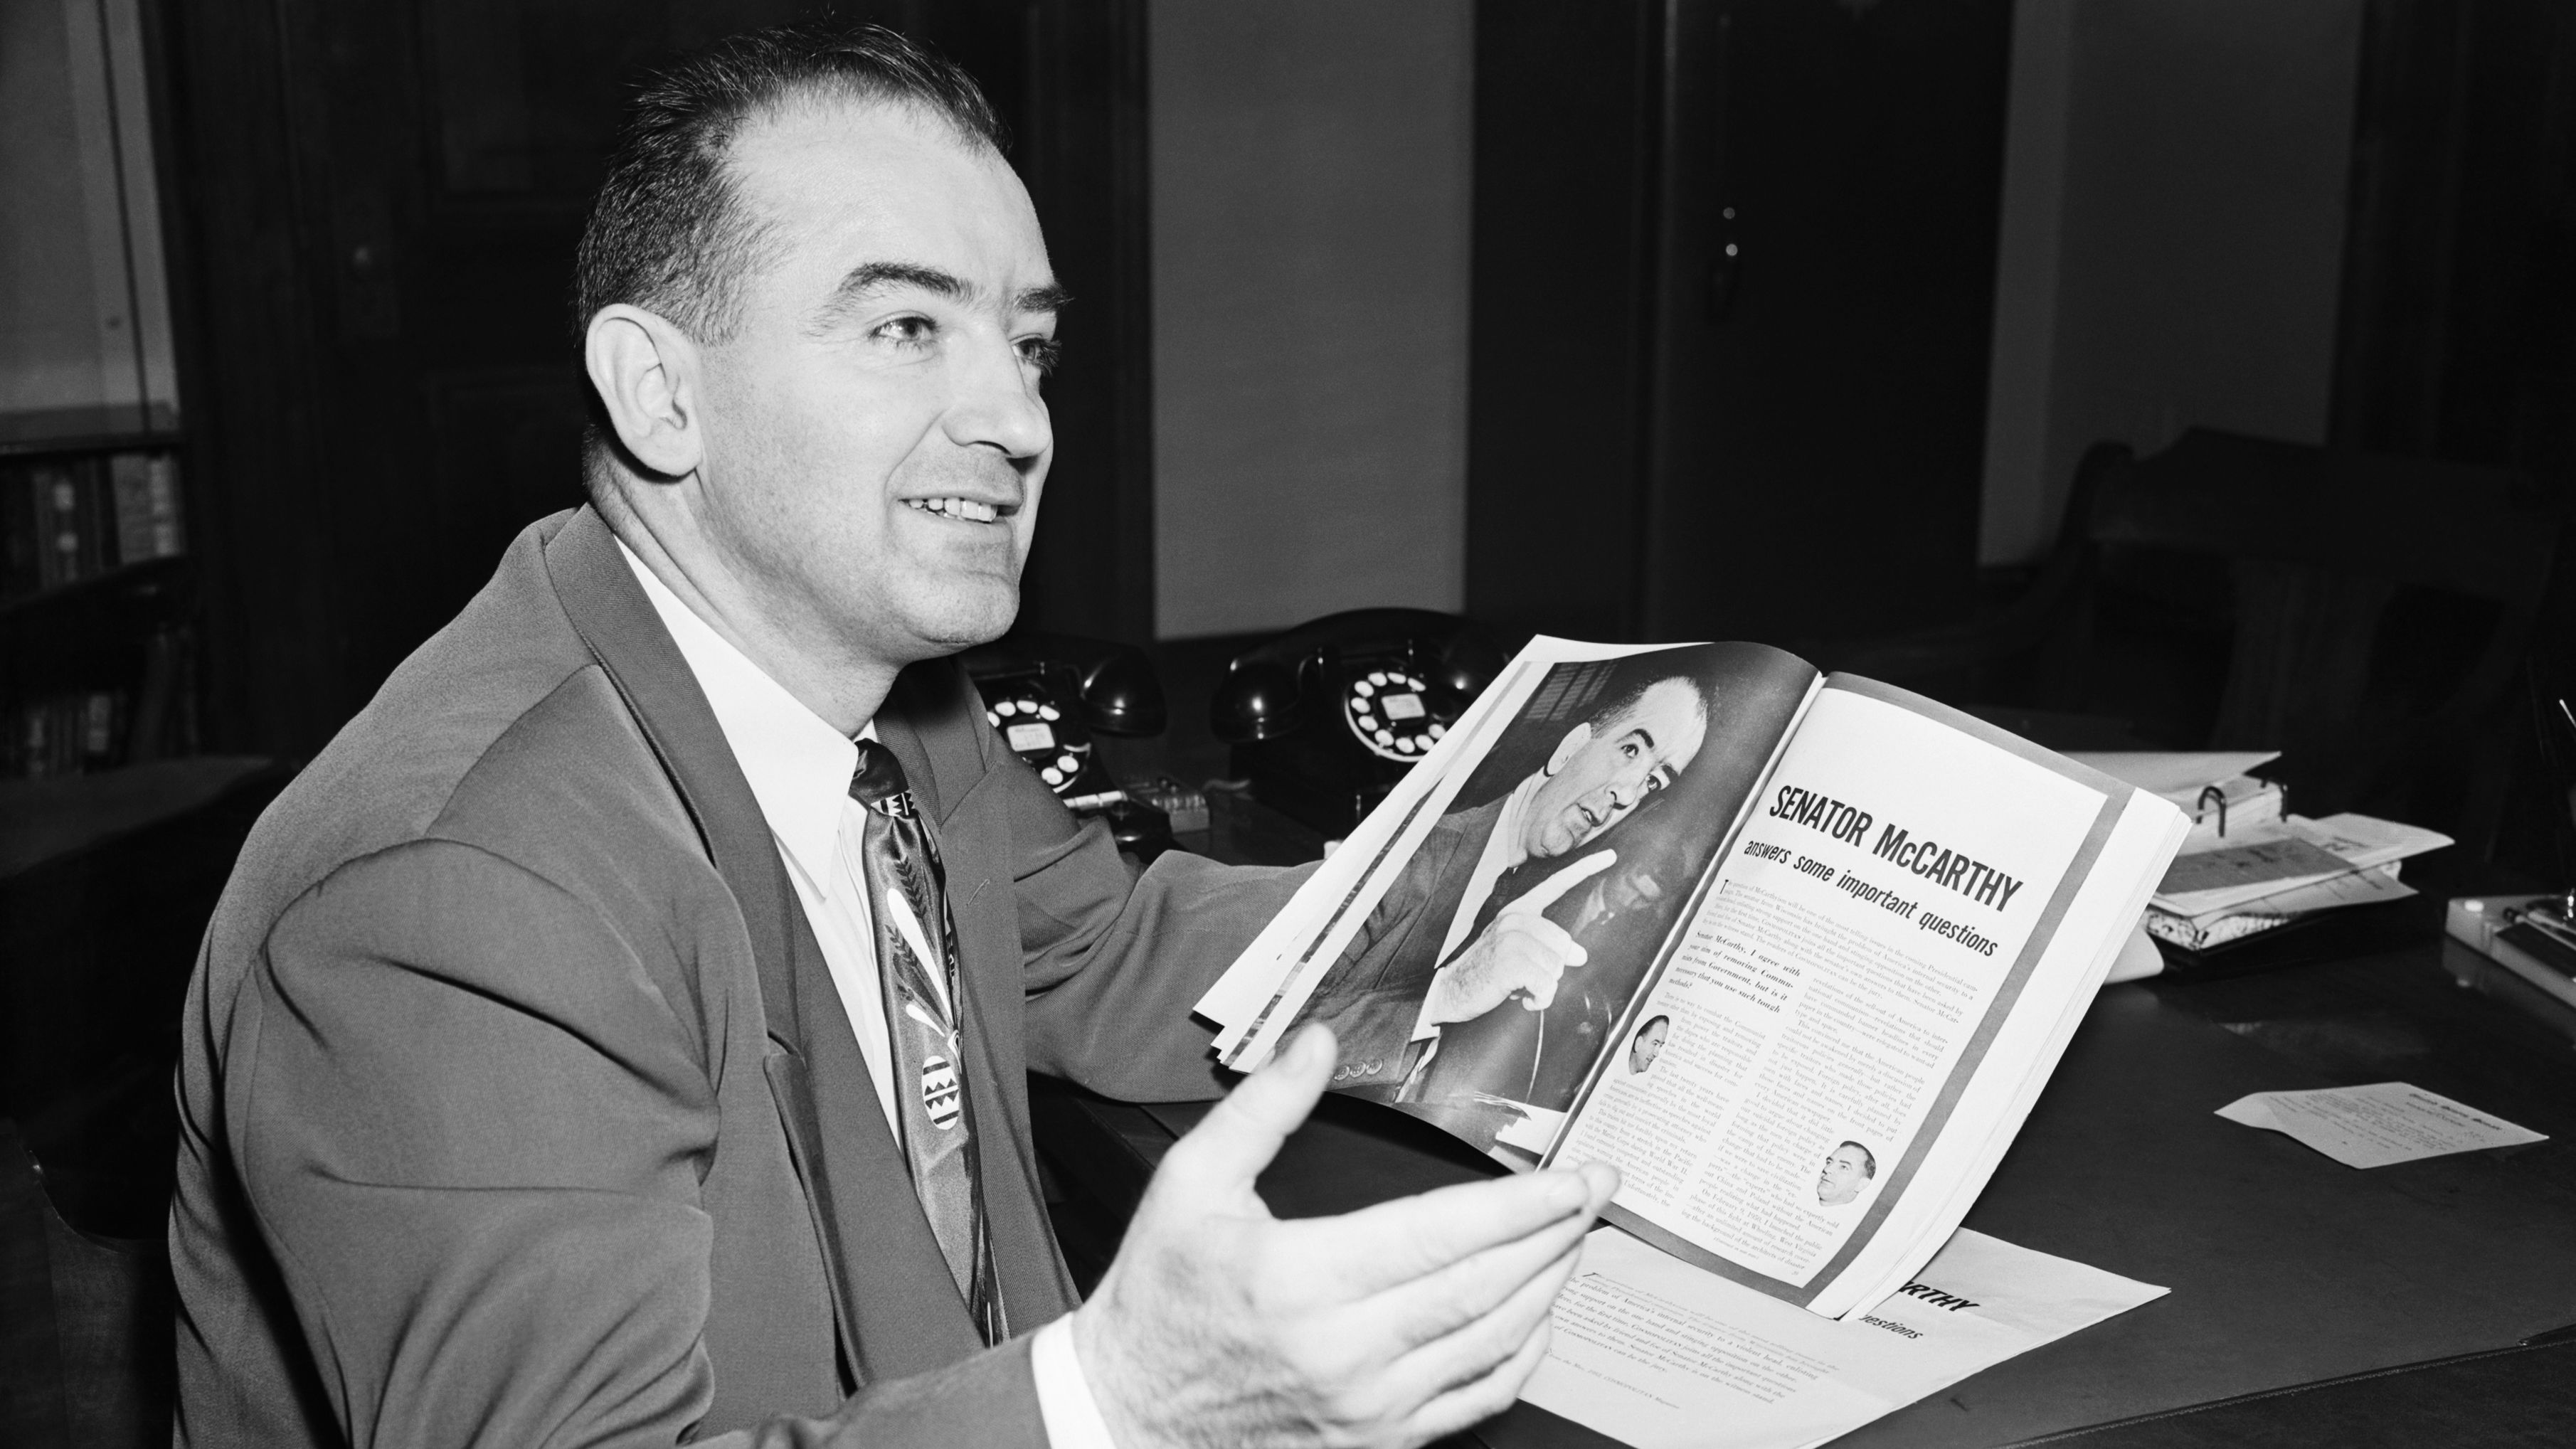 The Rosenbergs' conviction helped fuel the rise of McCarthyism, the anti-communist campaign led by US Sen. Joseph McCarthy of Wisconsin in the 1950s. Nearly 400 Americans -- including the ordinary, the famous and some who wore the uniform of the US military -- were interrogated in secret hearings, facing accusations from McCarthy and his staff about their alleged involvement in communist activities. While McCarthy enjoyed public attention and initially advanced his career with the start of the hearings, the tide turned. His harsh treatment of Army officers in the secret hearings precipitated his downfall.